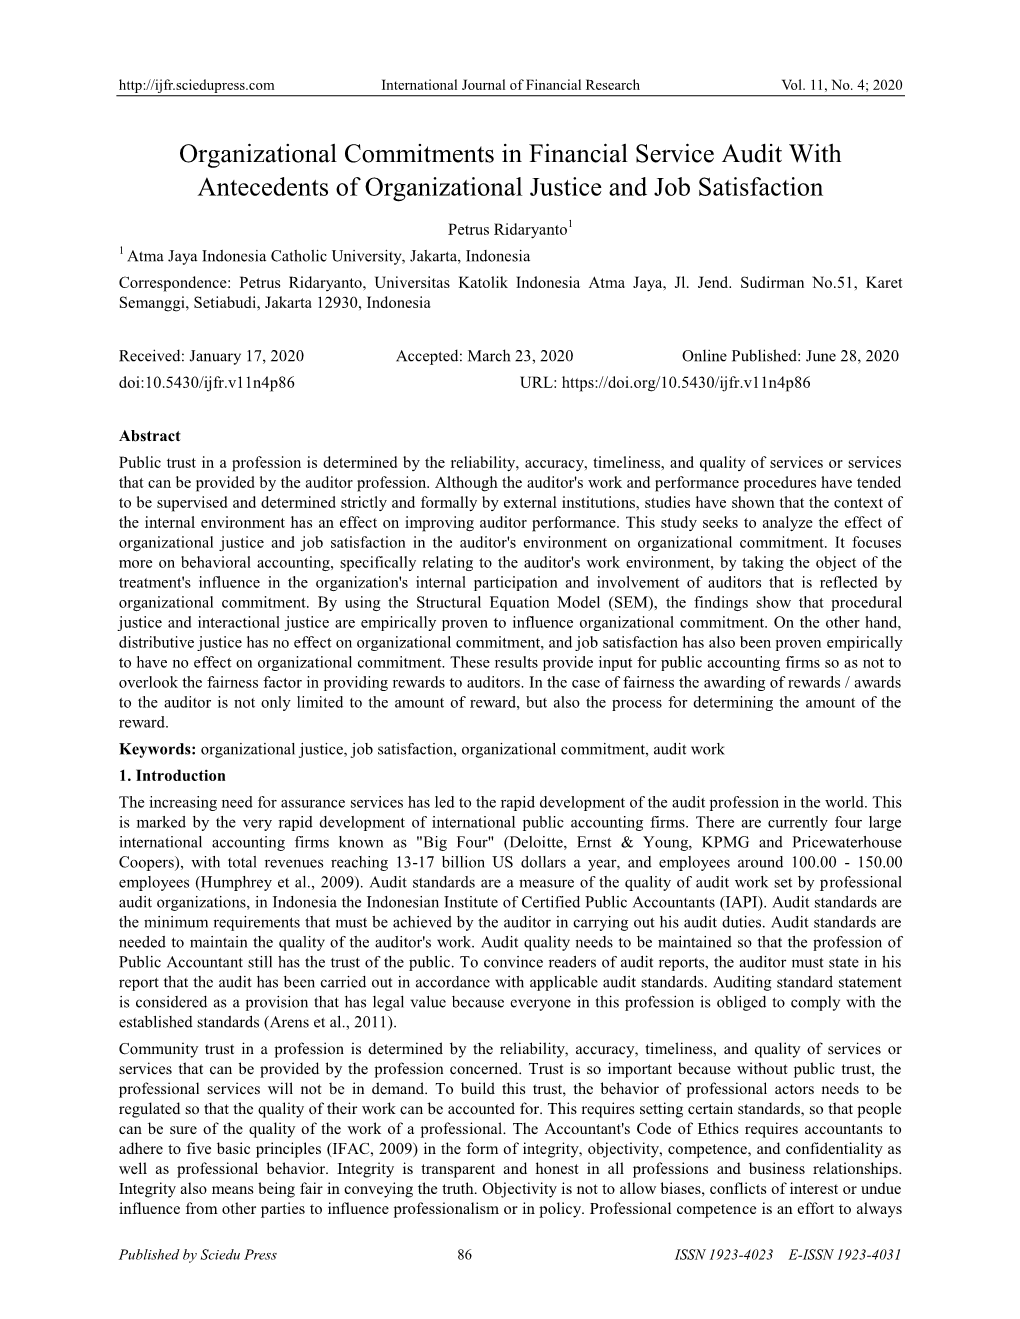 Organizational Commitments in Financial Service Audit with Antecedents of Organizational Justice and Job Satisfaction